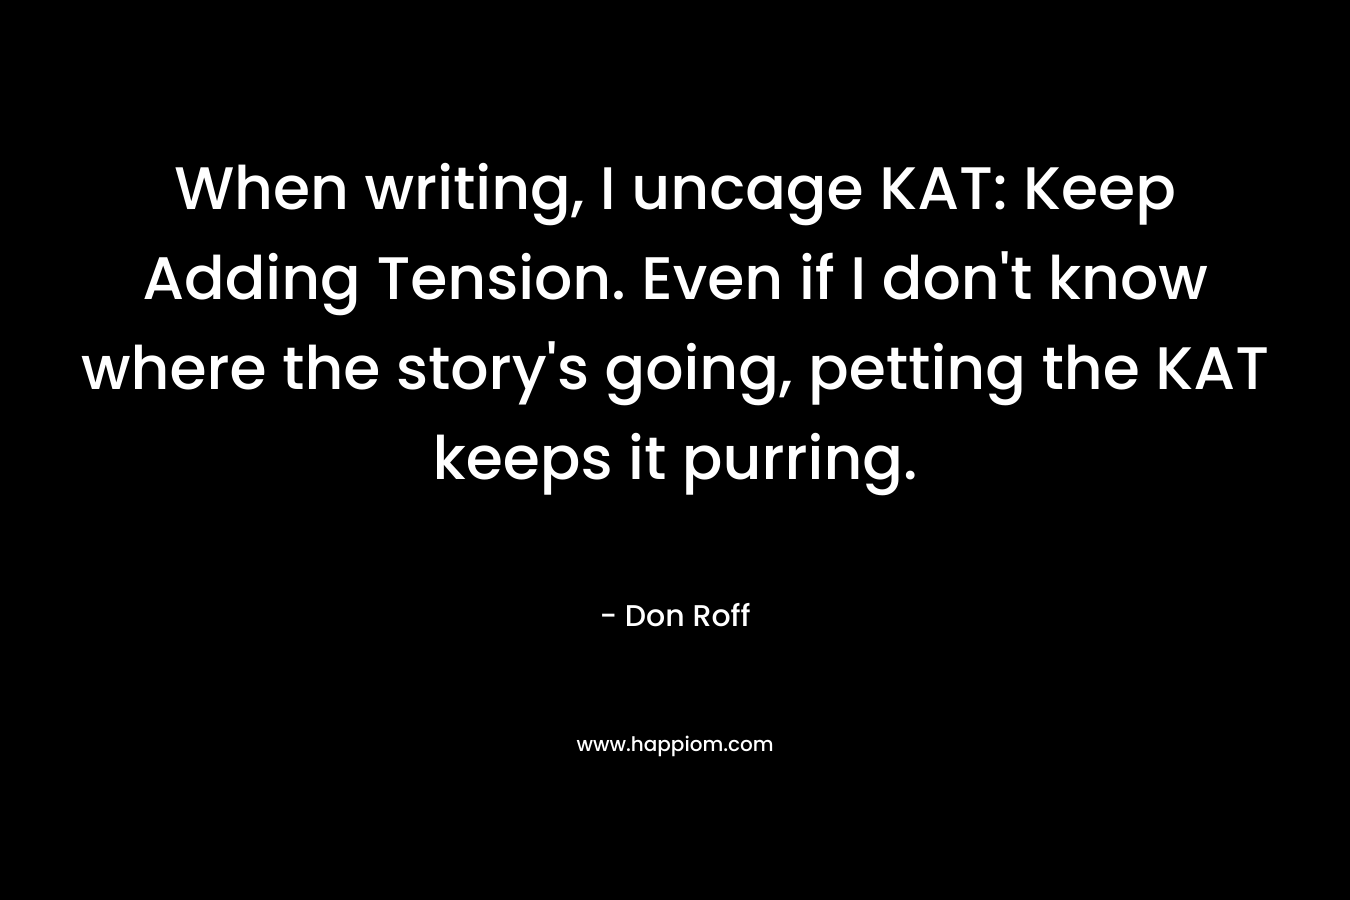 When writing, I uncage KAT: Keep Adding Tension. Even if I don't know where the story's going, petting the KAT keeps it purring.